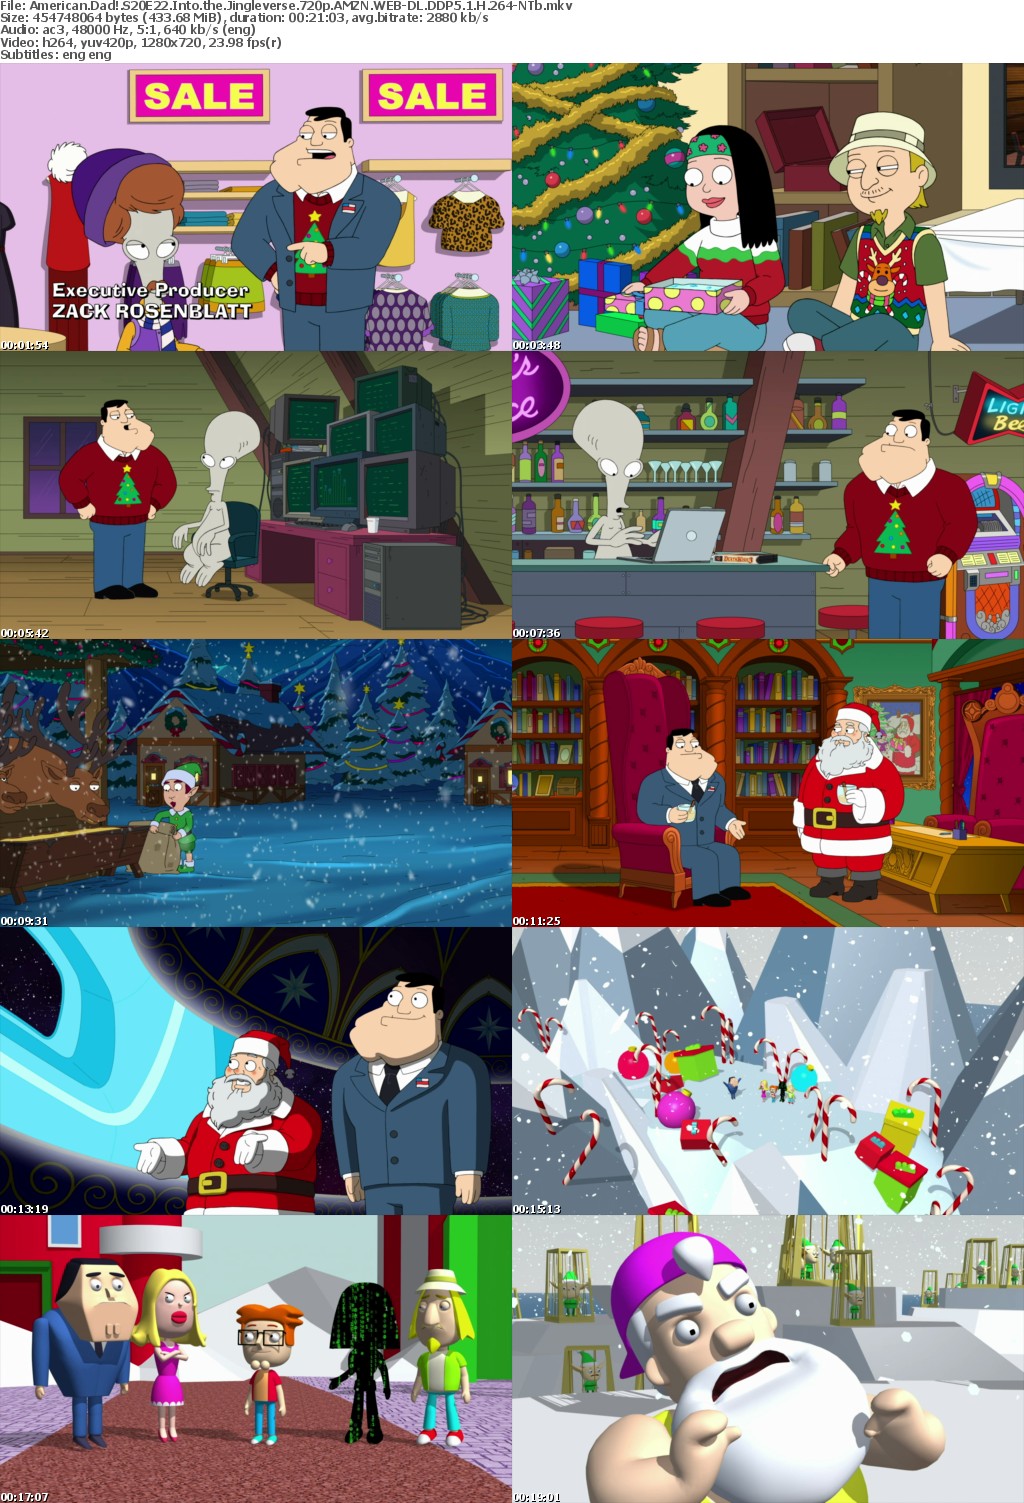 American Dad! S20E22 Into the Jingleverse 720p AMZN WEB-DL DDP5 1 H 264-NTb